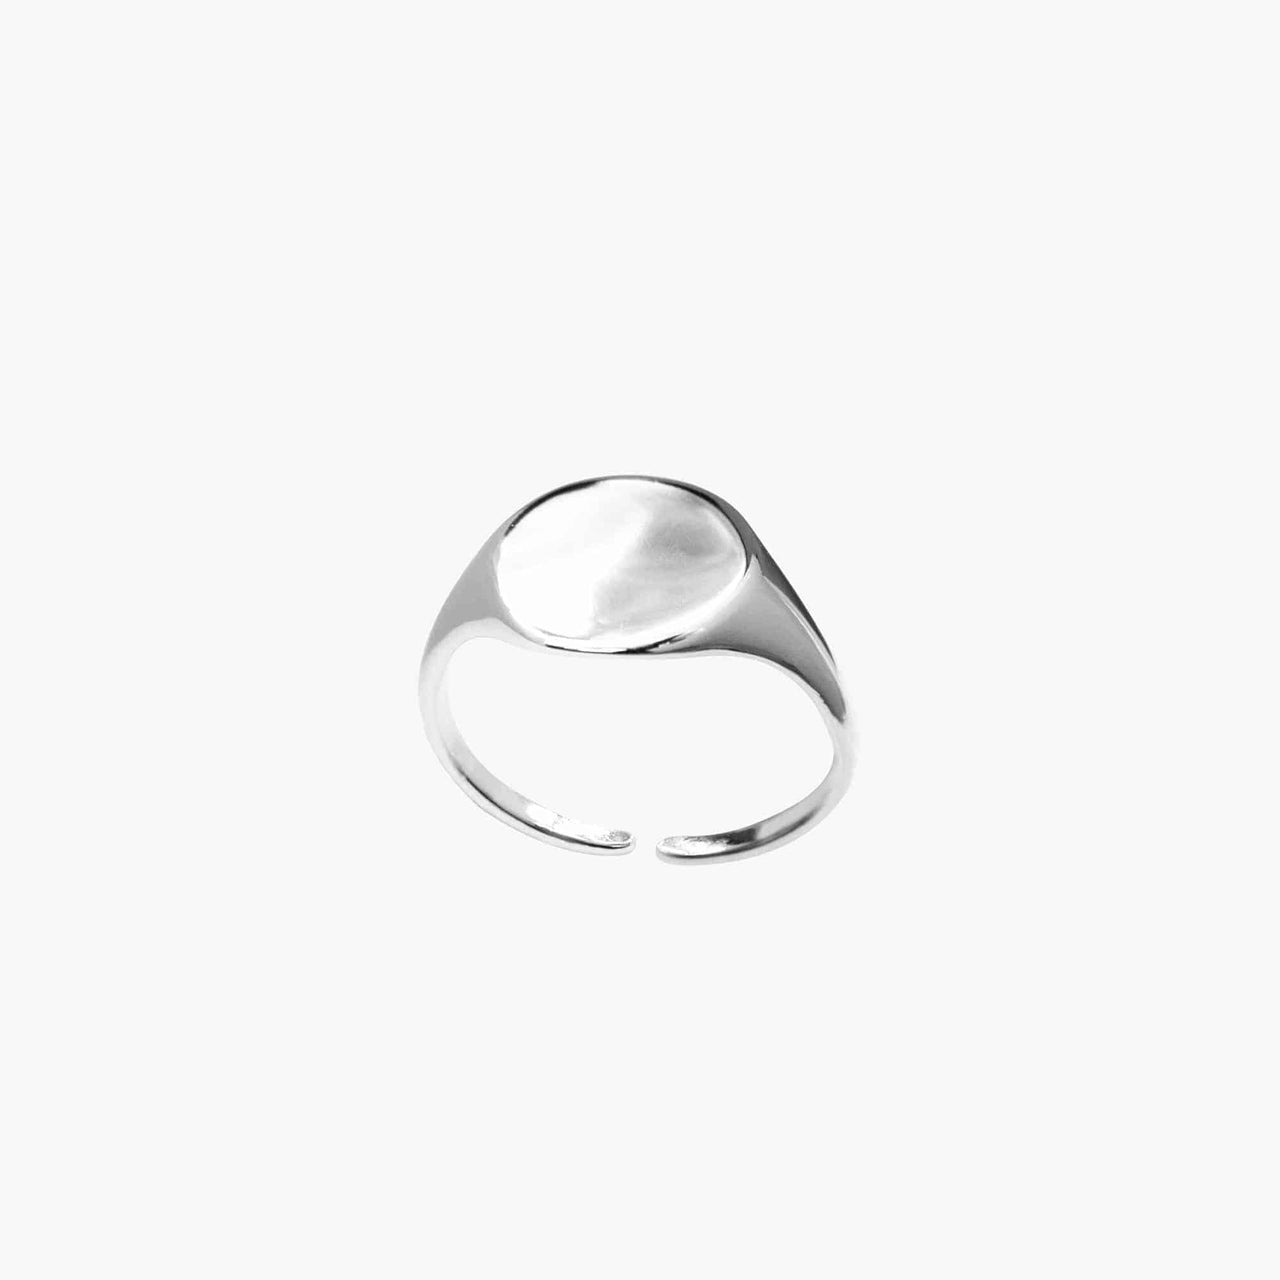 Brixton Signet Ring 24k White Gold, Ring Jewelry by Secret Box | LIT Boutique